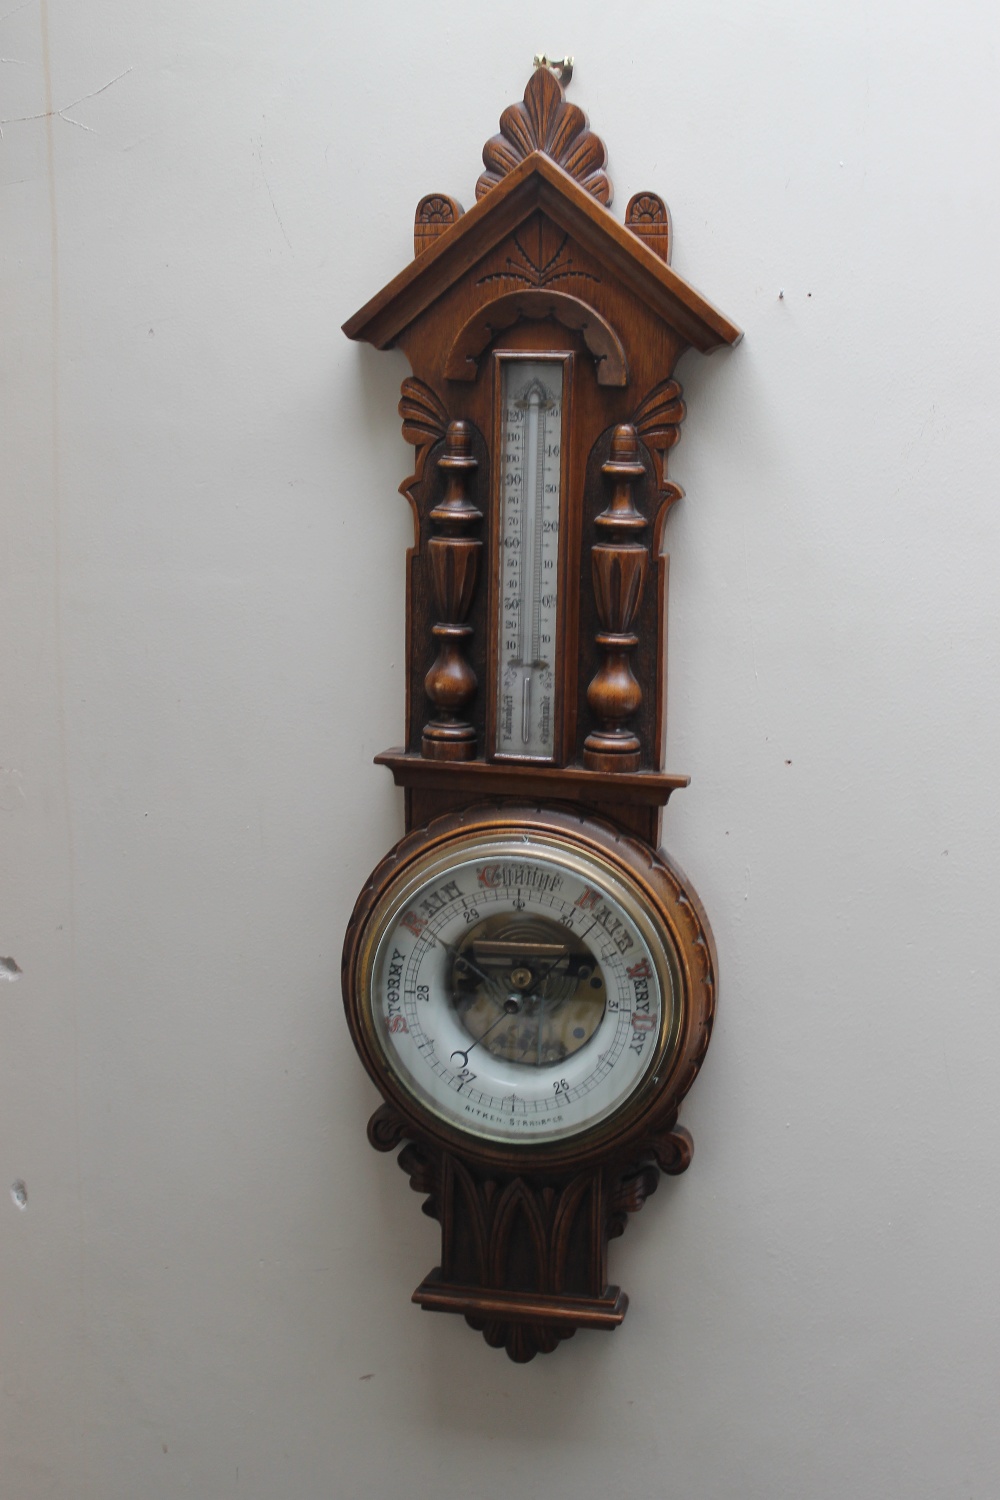 AN EARLY 20TH CENTURY OAK CARVED ANEROID BAROMETER, of Gothic style, carved with half turned